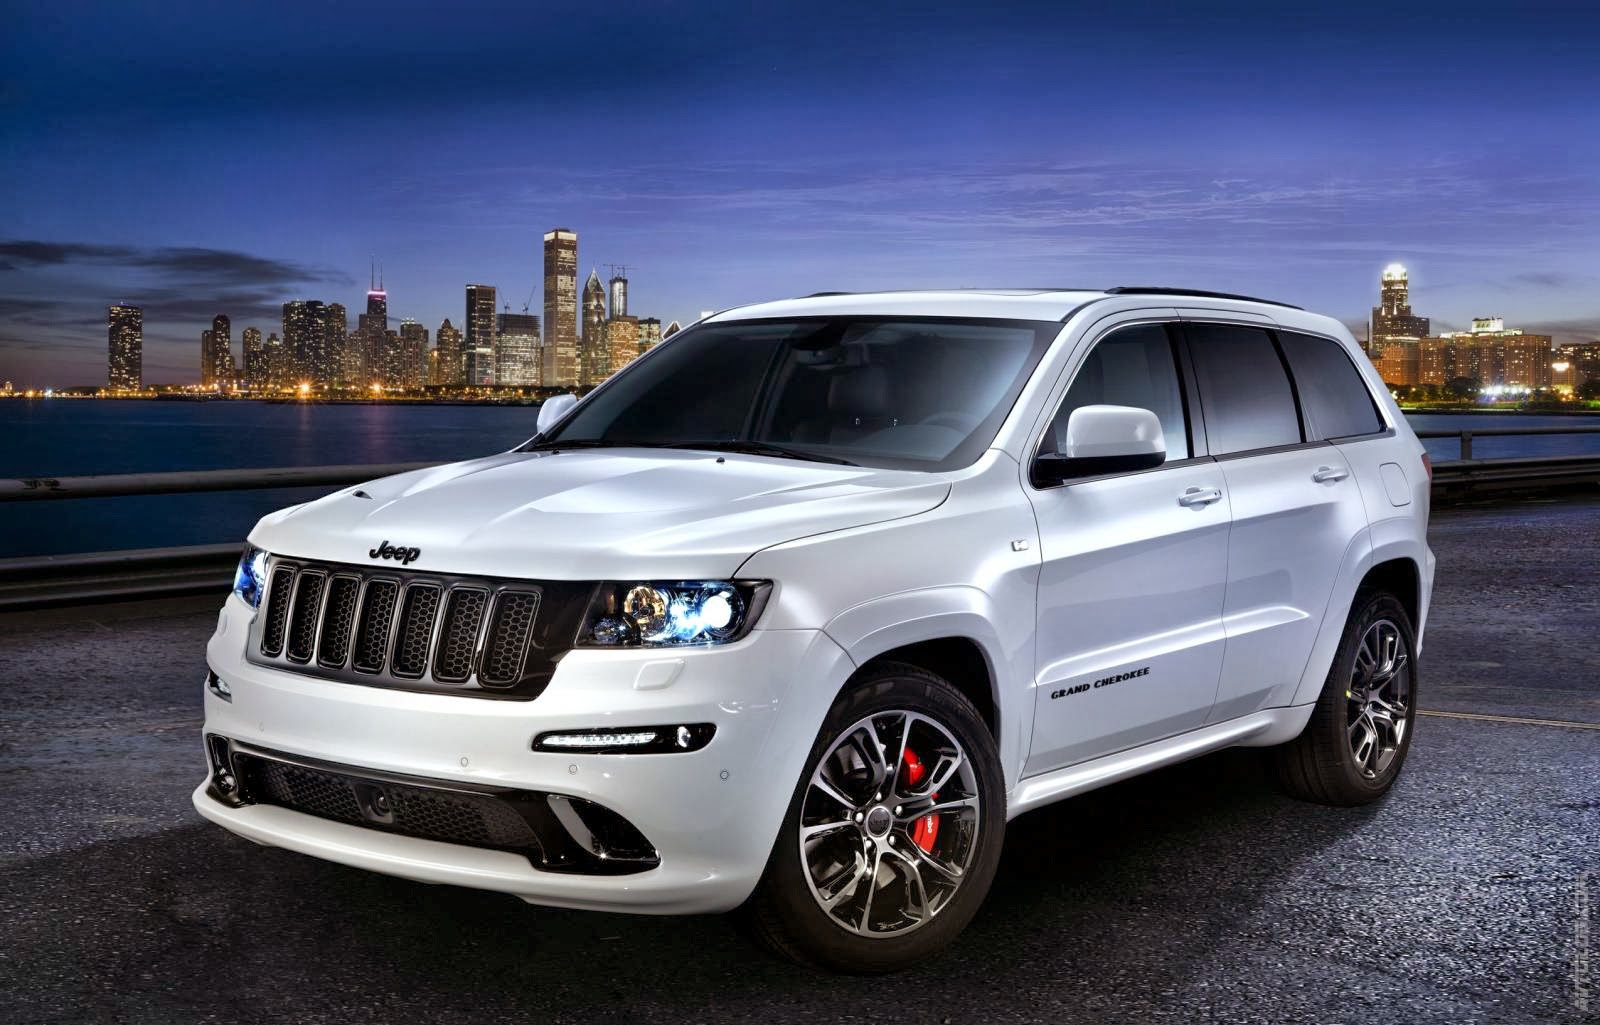 The best of cars: Jeep Grand Cherokee